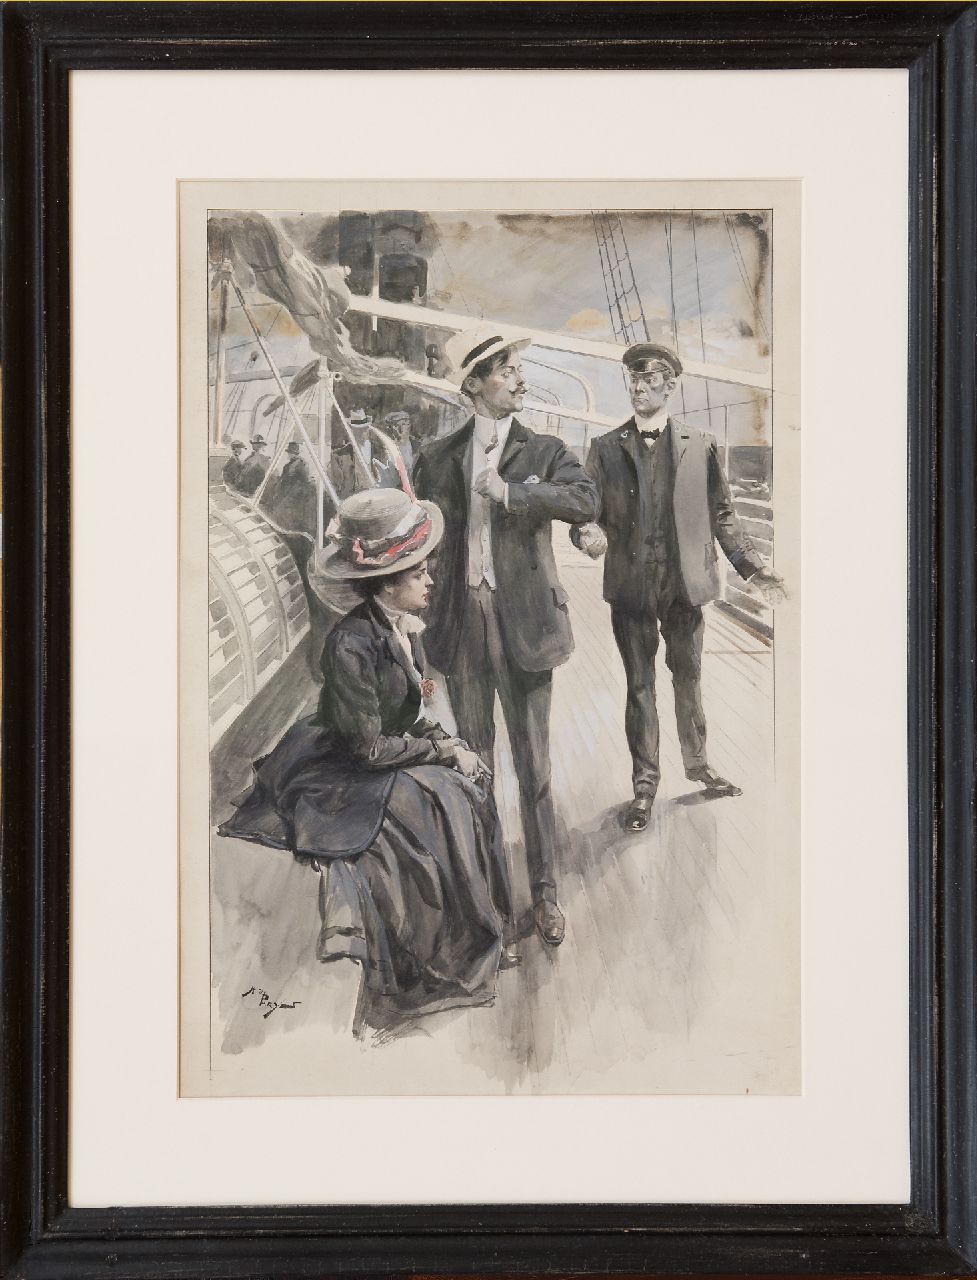 Parys A. de | A. de Parys | Watercolours and drawings offered for sale | An elegant couple on a ship deck, watercolour on painter's board 47.5 x 30.0 cm, signed l.l. and painted late 20s